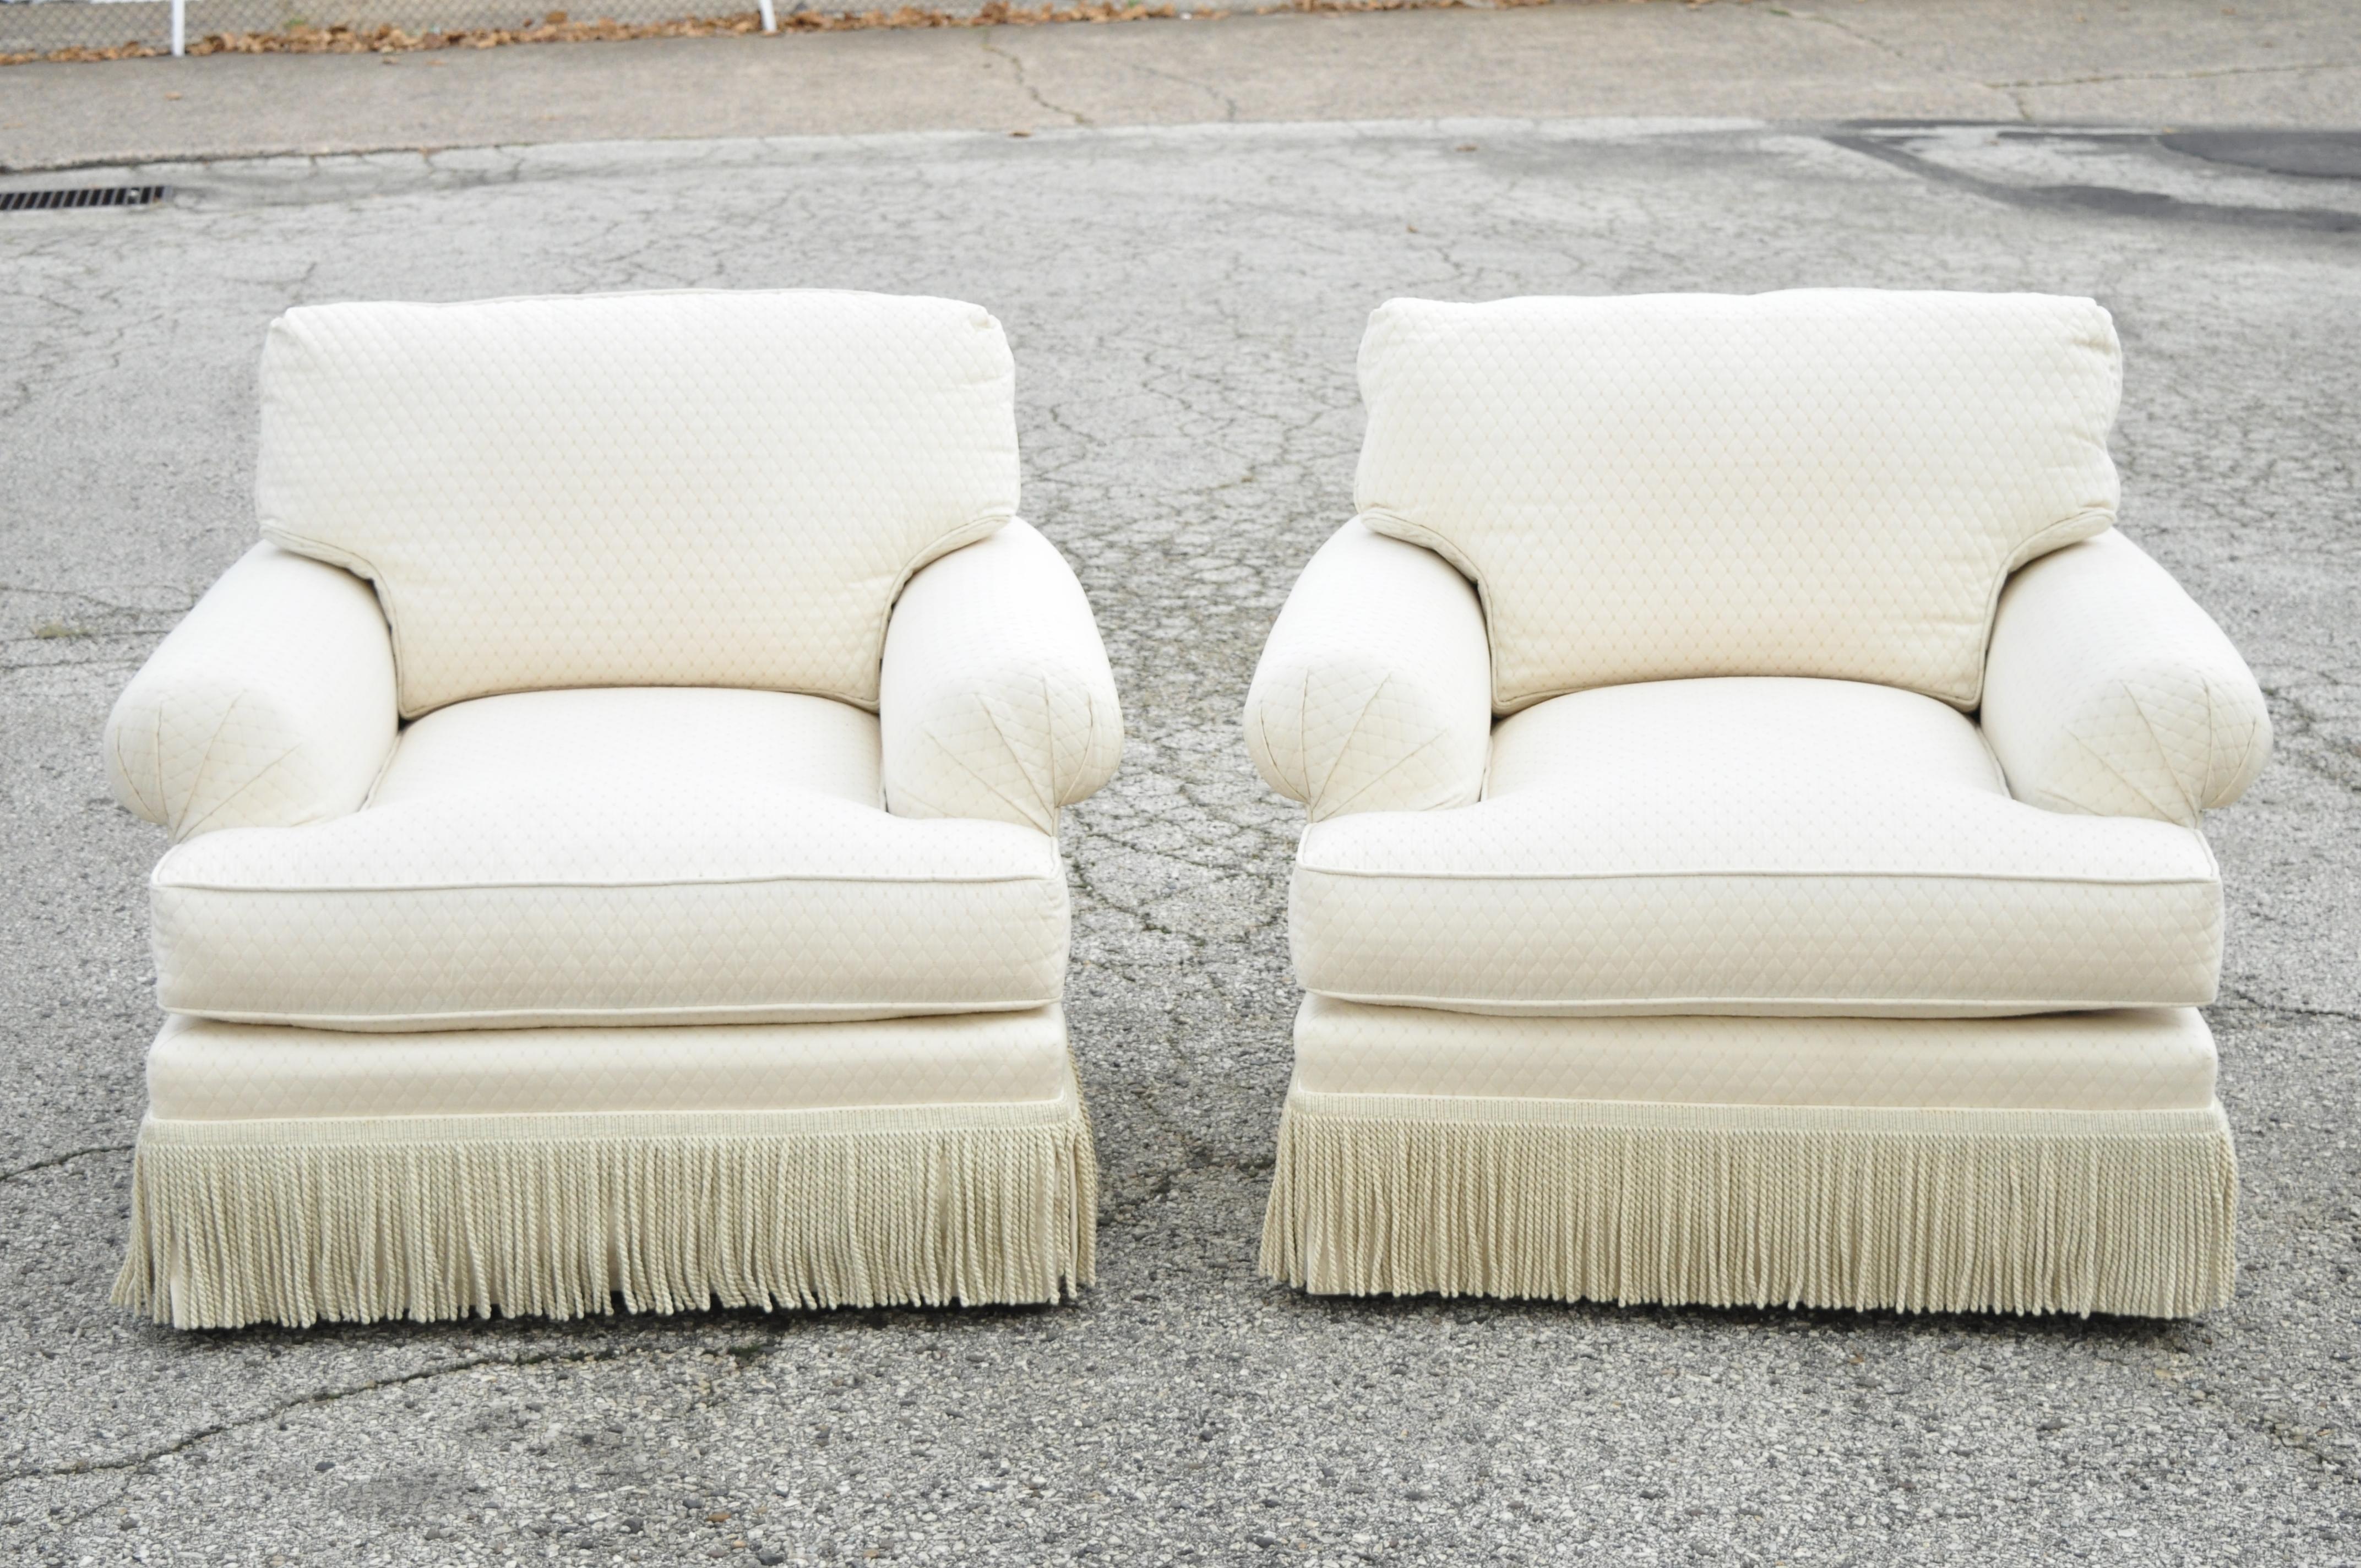 Baker custom rolled arm fringe skirt cream upholstered club lounge art deco chairs - a pair. Item features rolled and pleated arm, fringe skirt, cream/beige colored fabric with small squares, loose cushions, solid wood frames, original label,